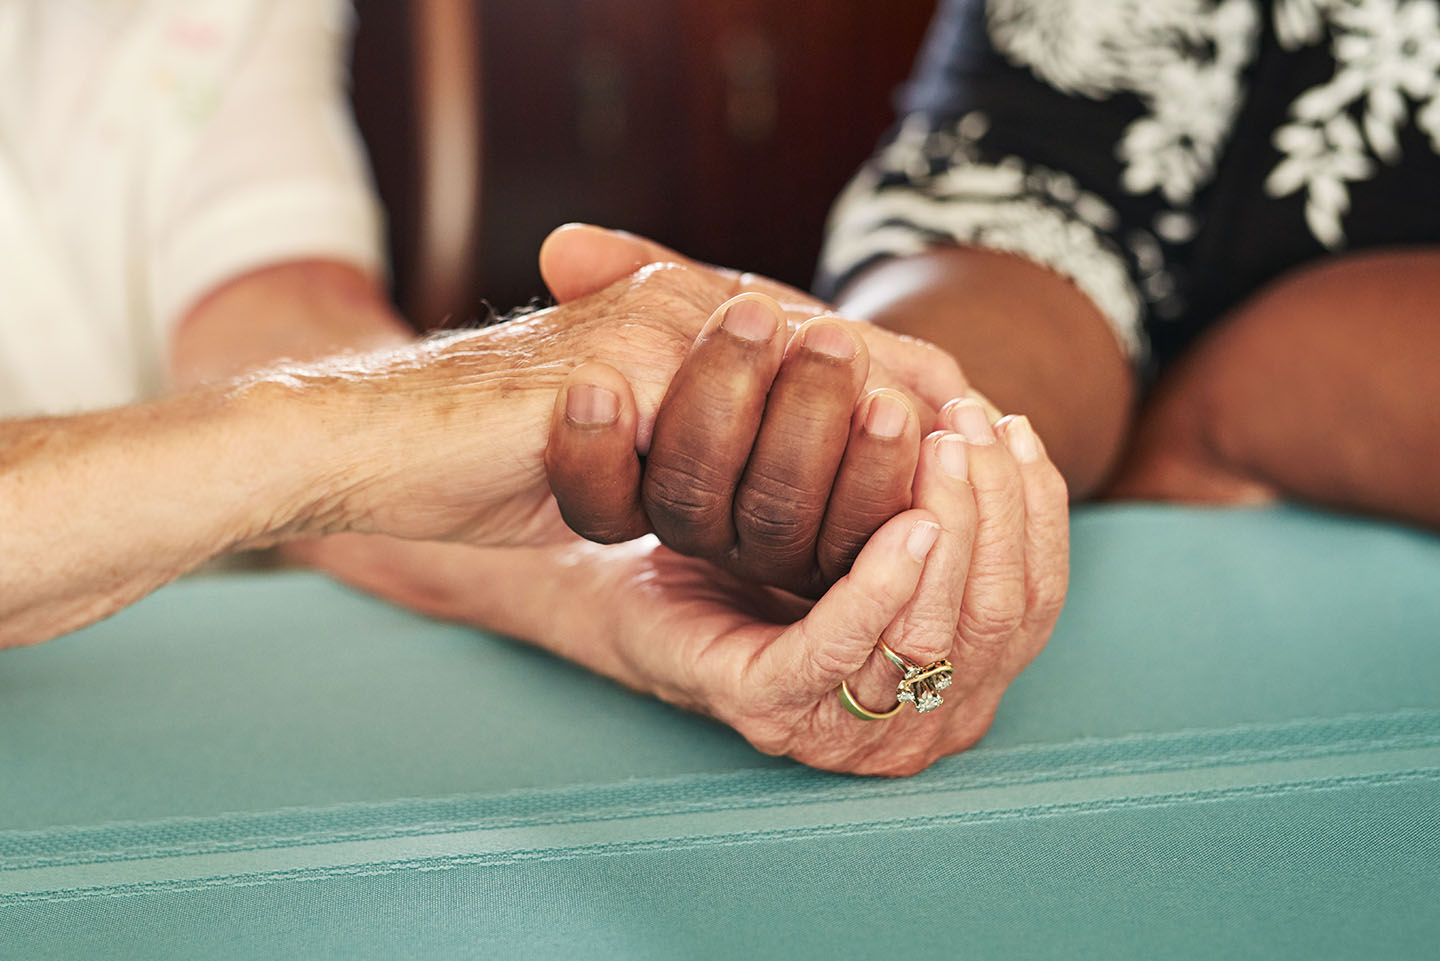 Two elderly women holding each others' hands in solidarity and comfort